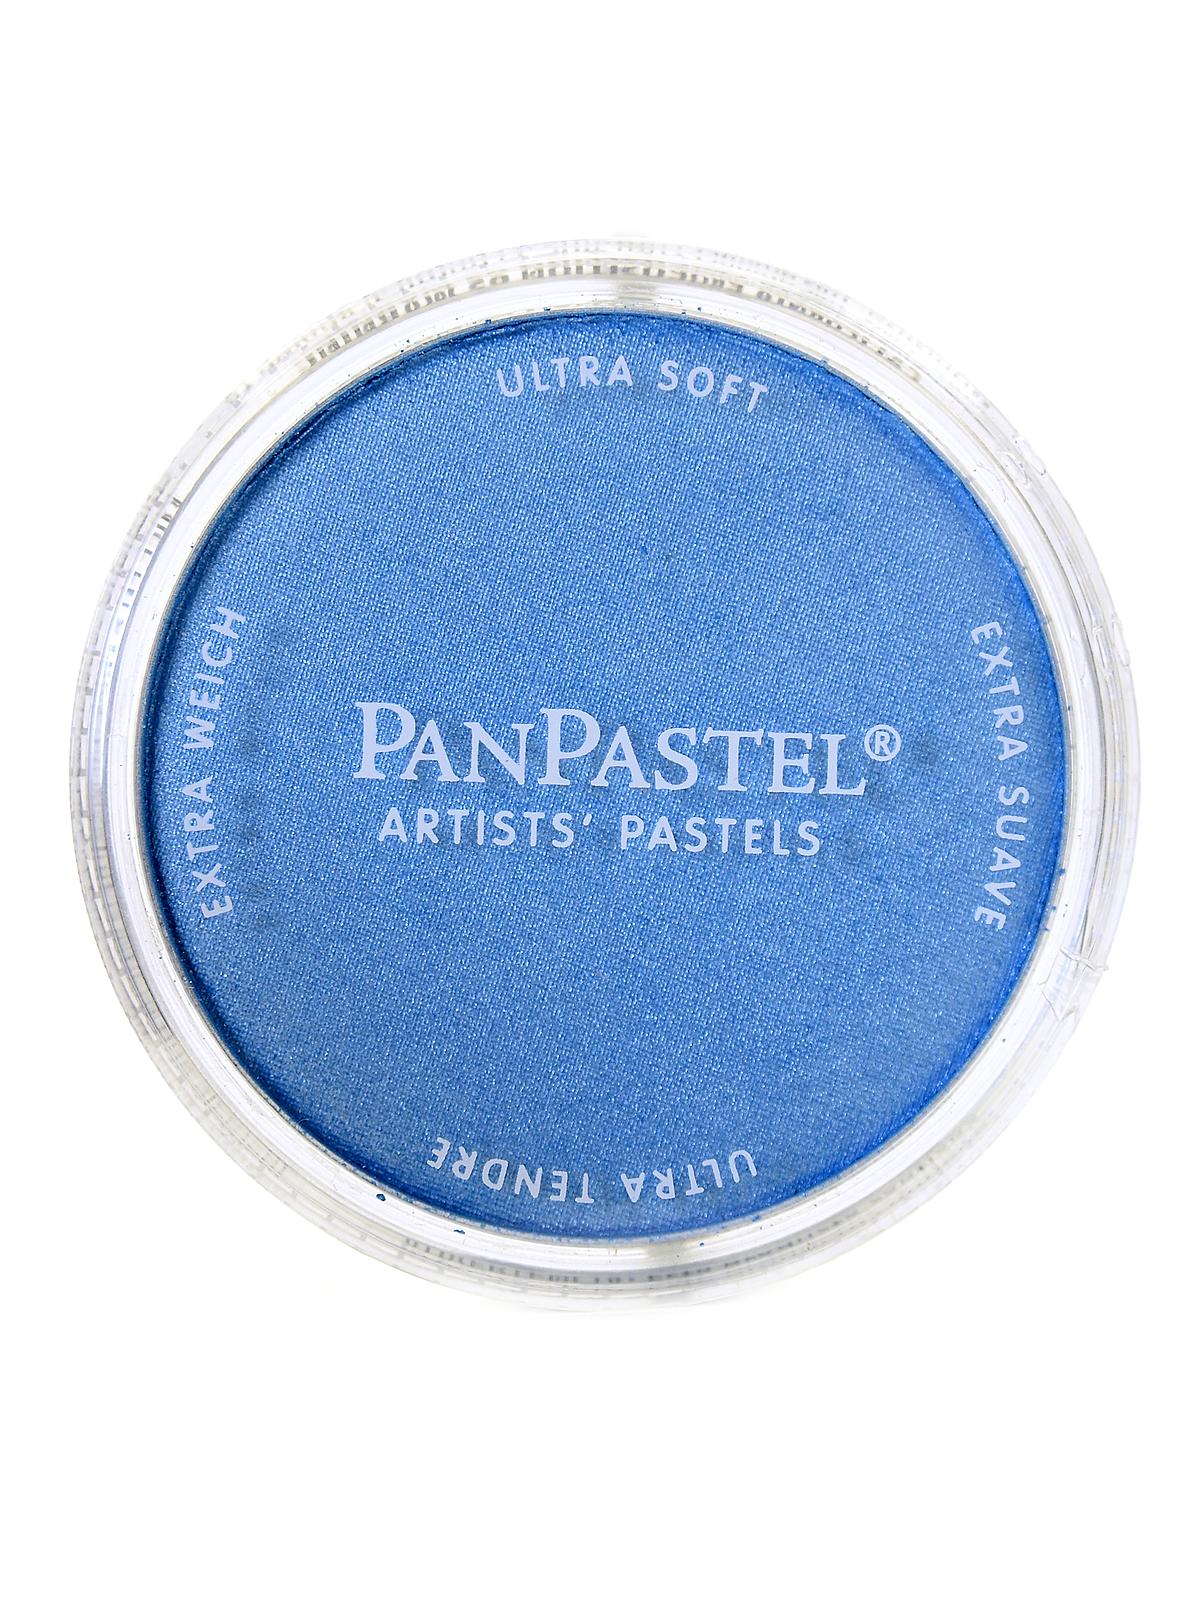 Artists' Pastels Pearlescent Blue 955.5 9 Ml